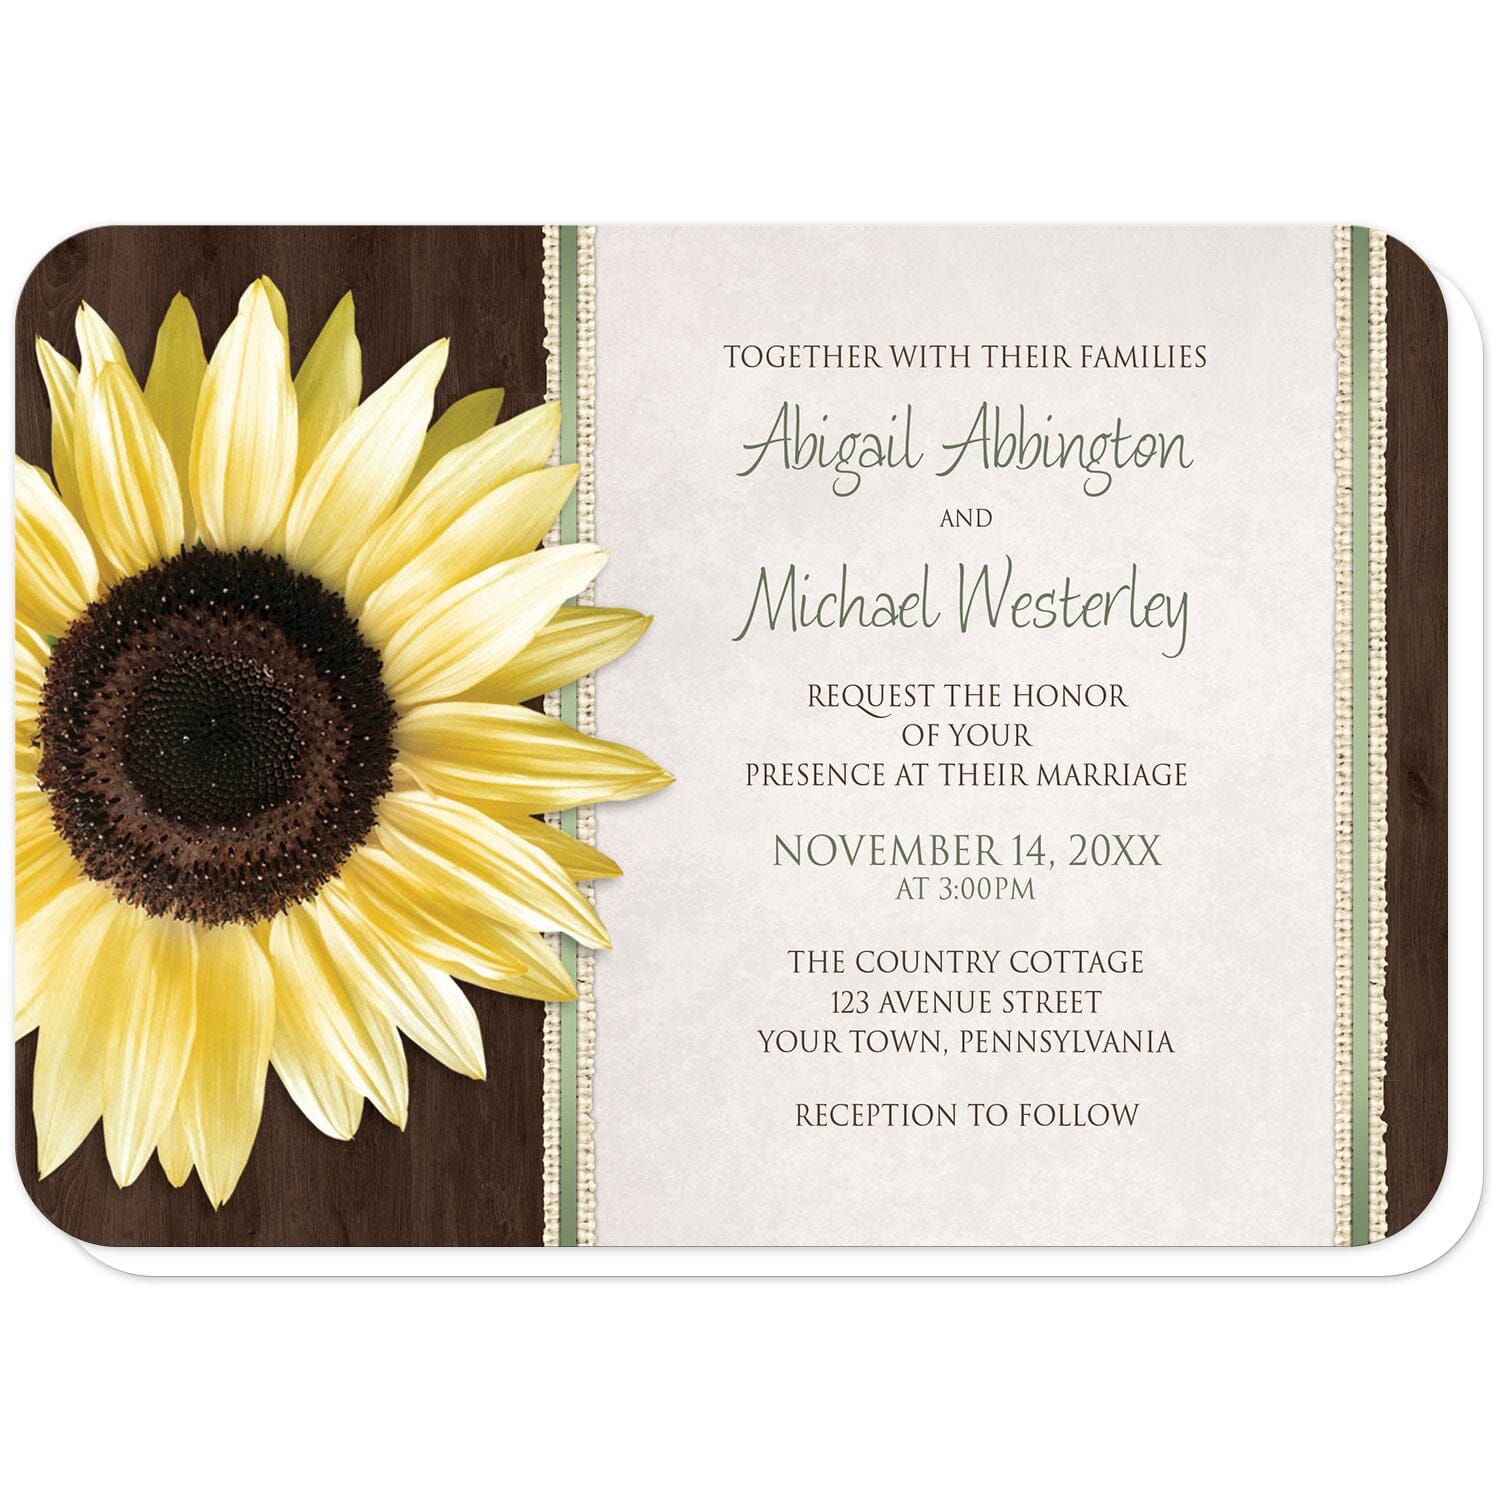 Country Sunflower Wood Brown Green Wedding Invitations (with rounded corners) at Artistically Invited. Country sunflower wood brown green wedding invitations in a floral southern style, with a big yellow sunflower over a dark brown wood pattern illustration on the left side. Your personalized marriage celebration details are custom printed in green and brown over a beige parchment design to the right of the sunflower, outlined vertically by burlap strips and green stripes.